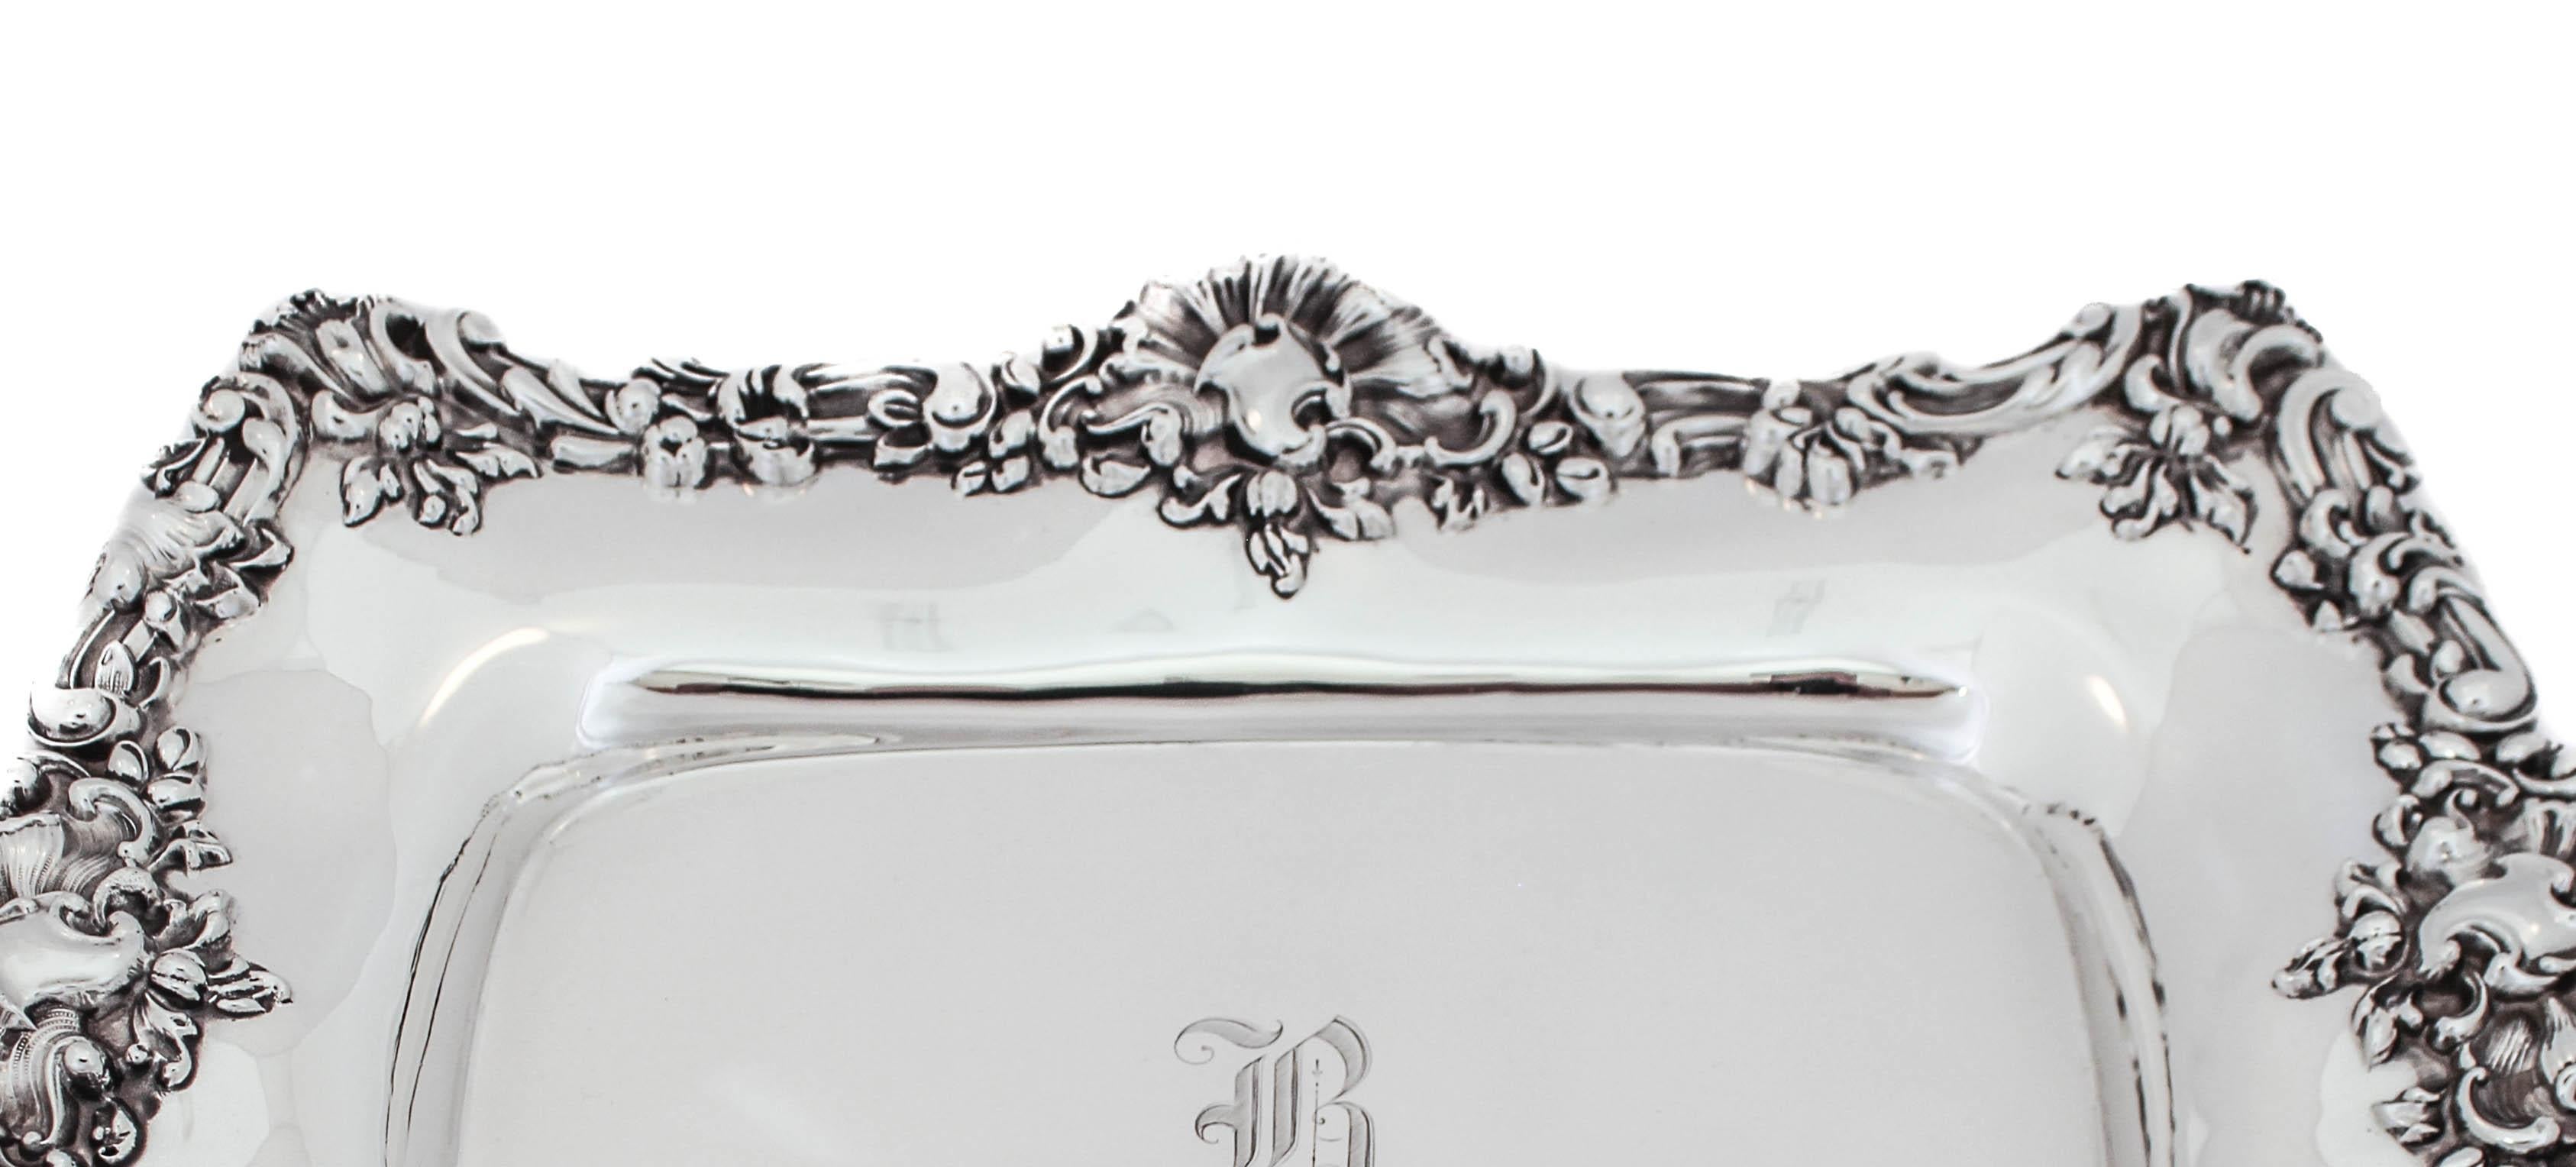 Being offered is sterling silver oblong platter by William Durgin Silver.  An exceptional example of Rocco style, this antique piece has a rich and elaborate design along the fluted edge. Silver pieces designed in the Rocco style featured natural